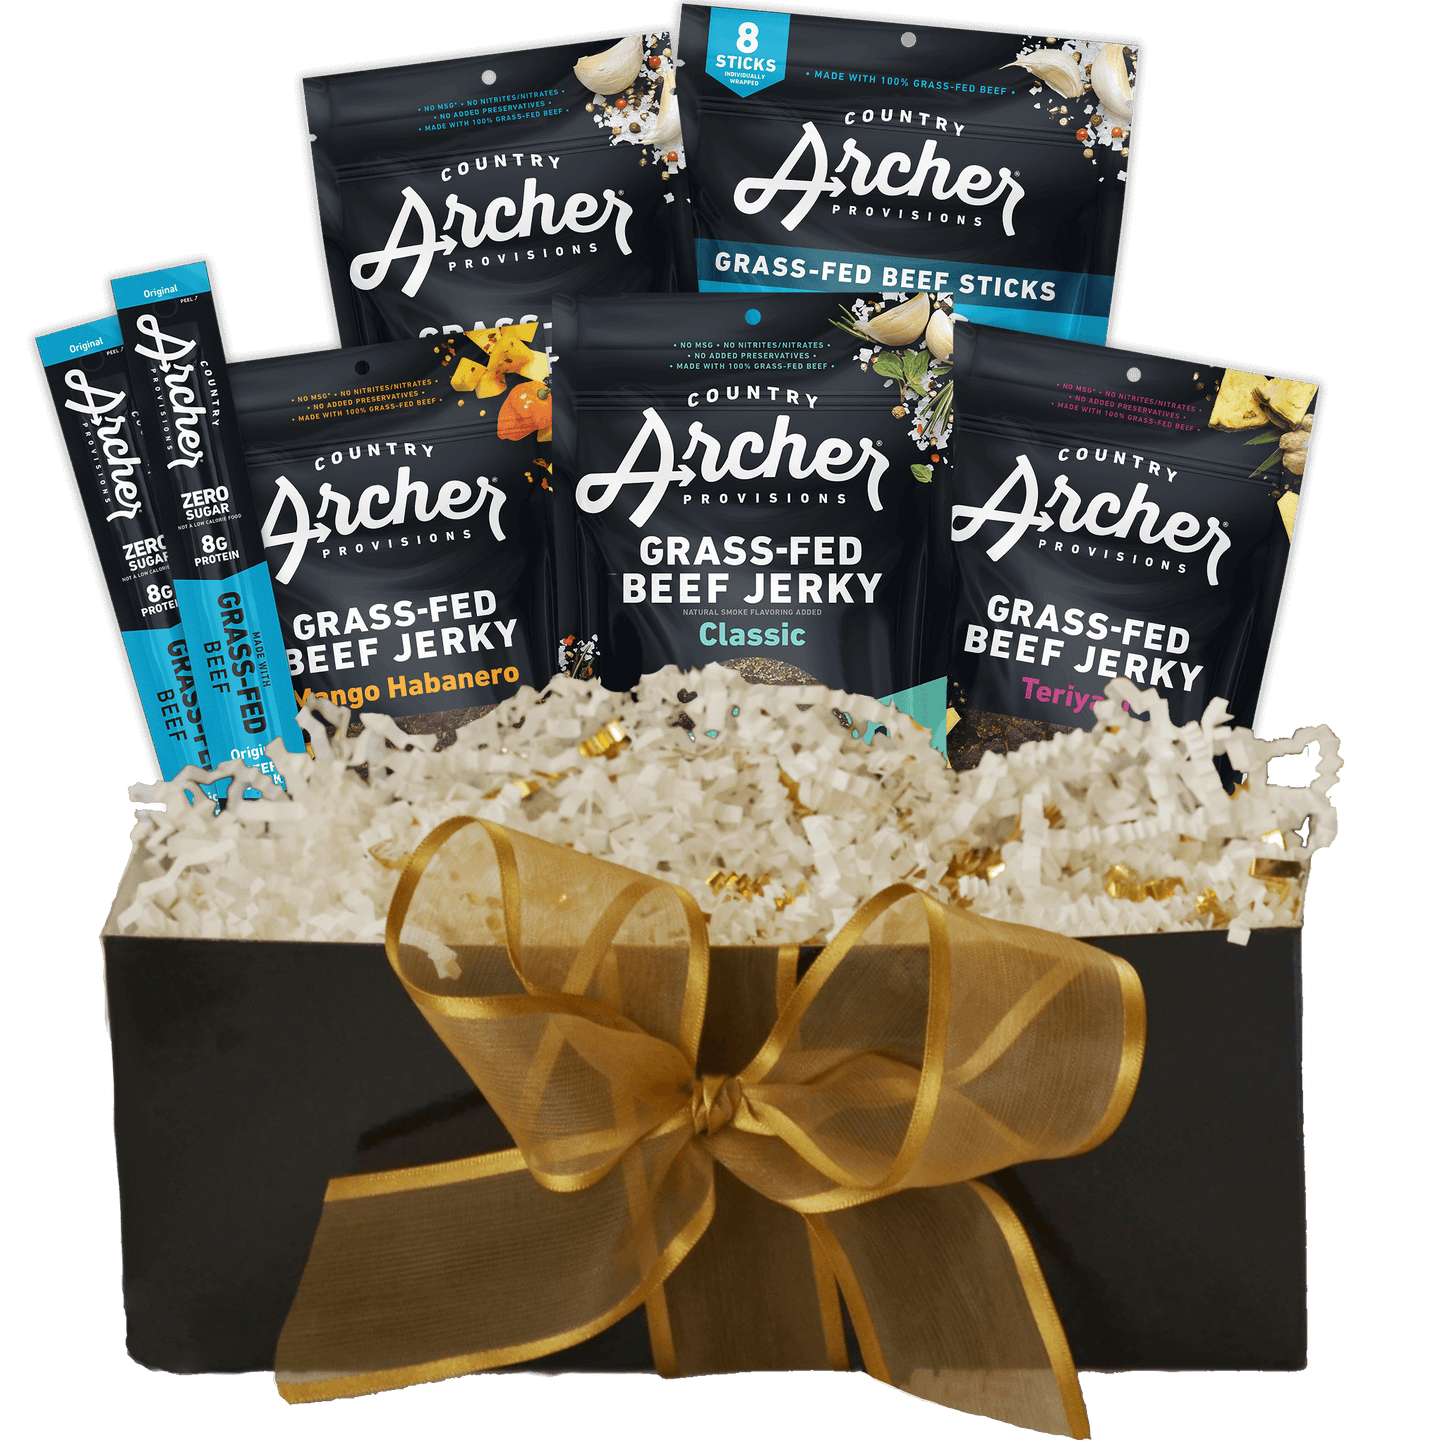 Jerky for the Holiday Gift Box - Country Archer Jerky is the gift they want!! This yummy, thoughtful holiday gift box is packed full of everyone's favorite jerky flavors. Gift Box includes: Original Beef Jerky, 2.5 oz Bag (1), Mango Habanero Beef Jerky, 2.5 oz Bag (1), Teriyaki Beef Jerky, 2.5 oz Bag (1), Zero Sugar Classic Beef Jerky, 2 oz Bag (1), Original Minis, 8 oz Bag (1), Original Beef Jerky Stick, 1 oz (2). All items are Grass-fed Beef. Please note: Box color and ribbon may change.